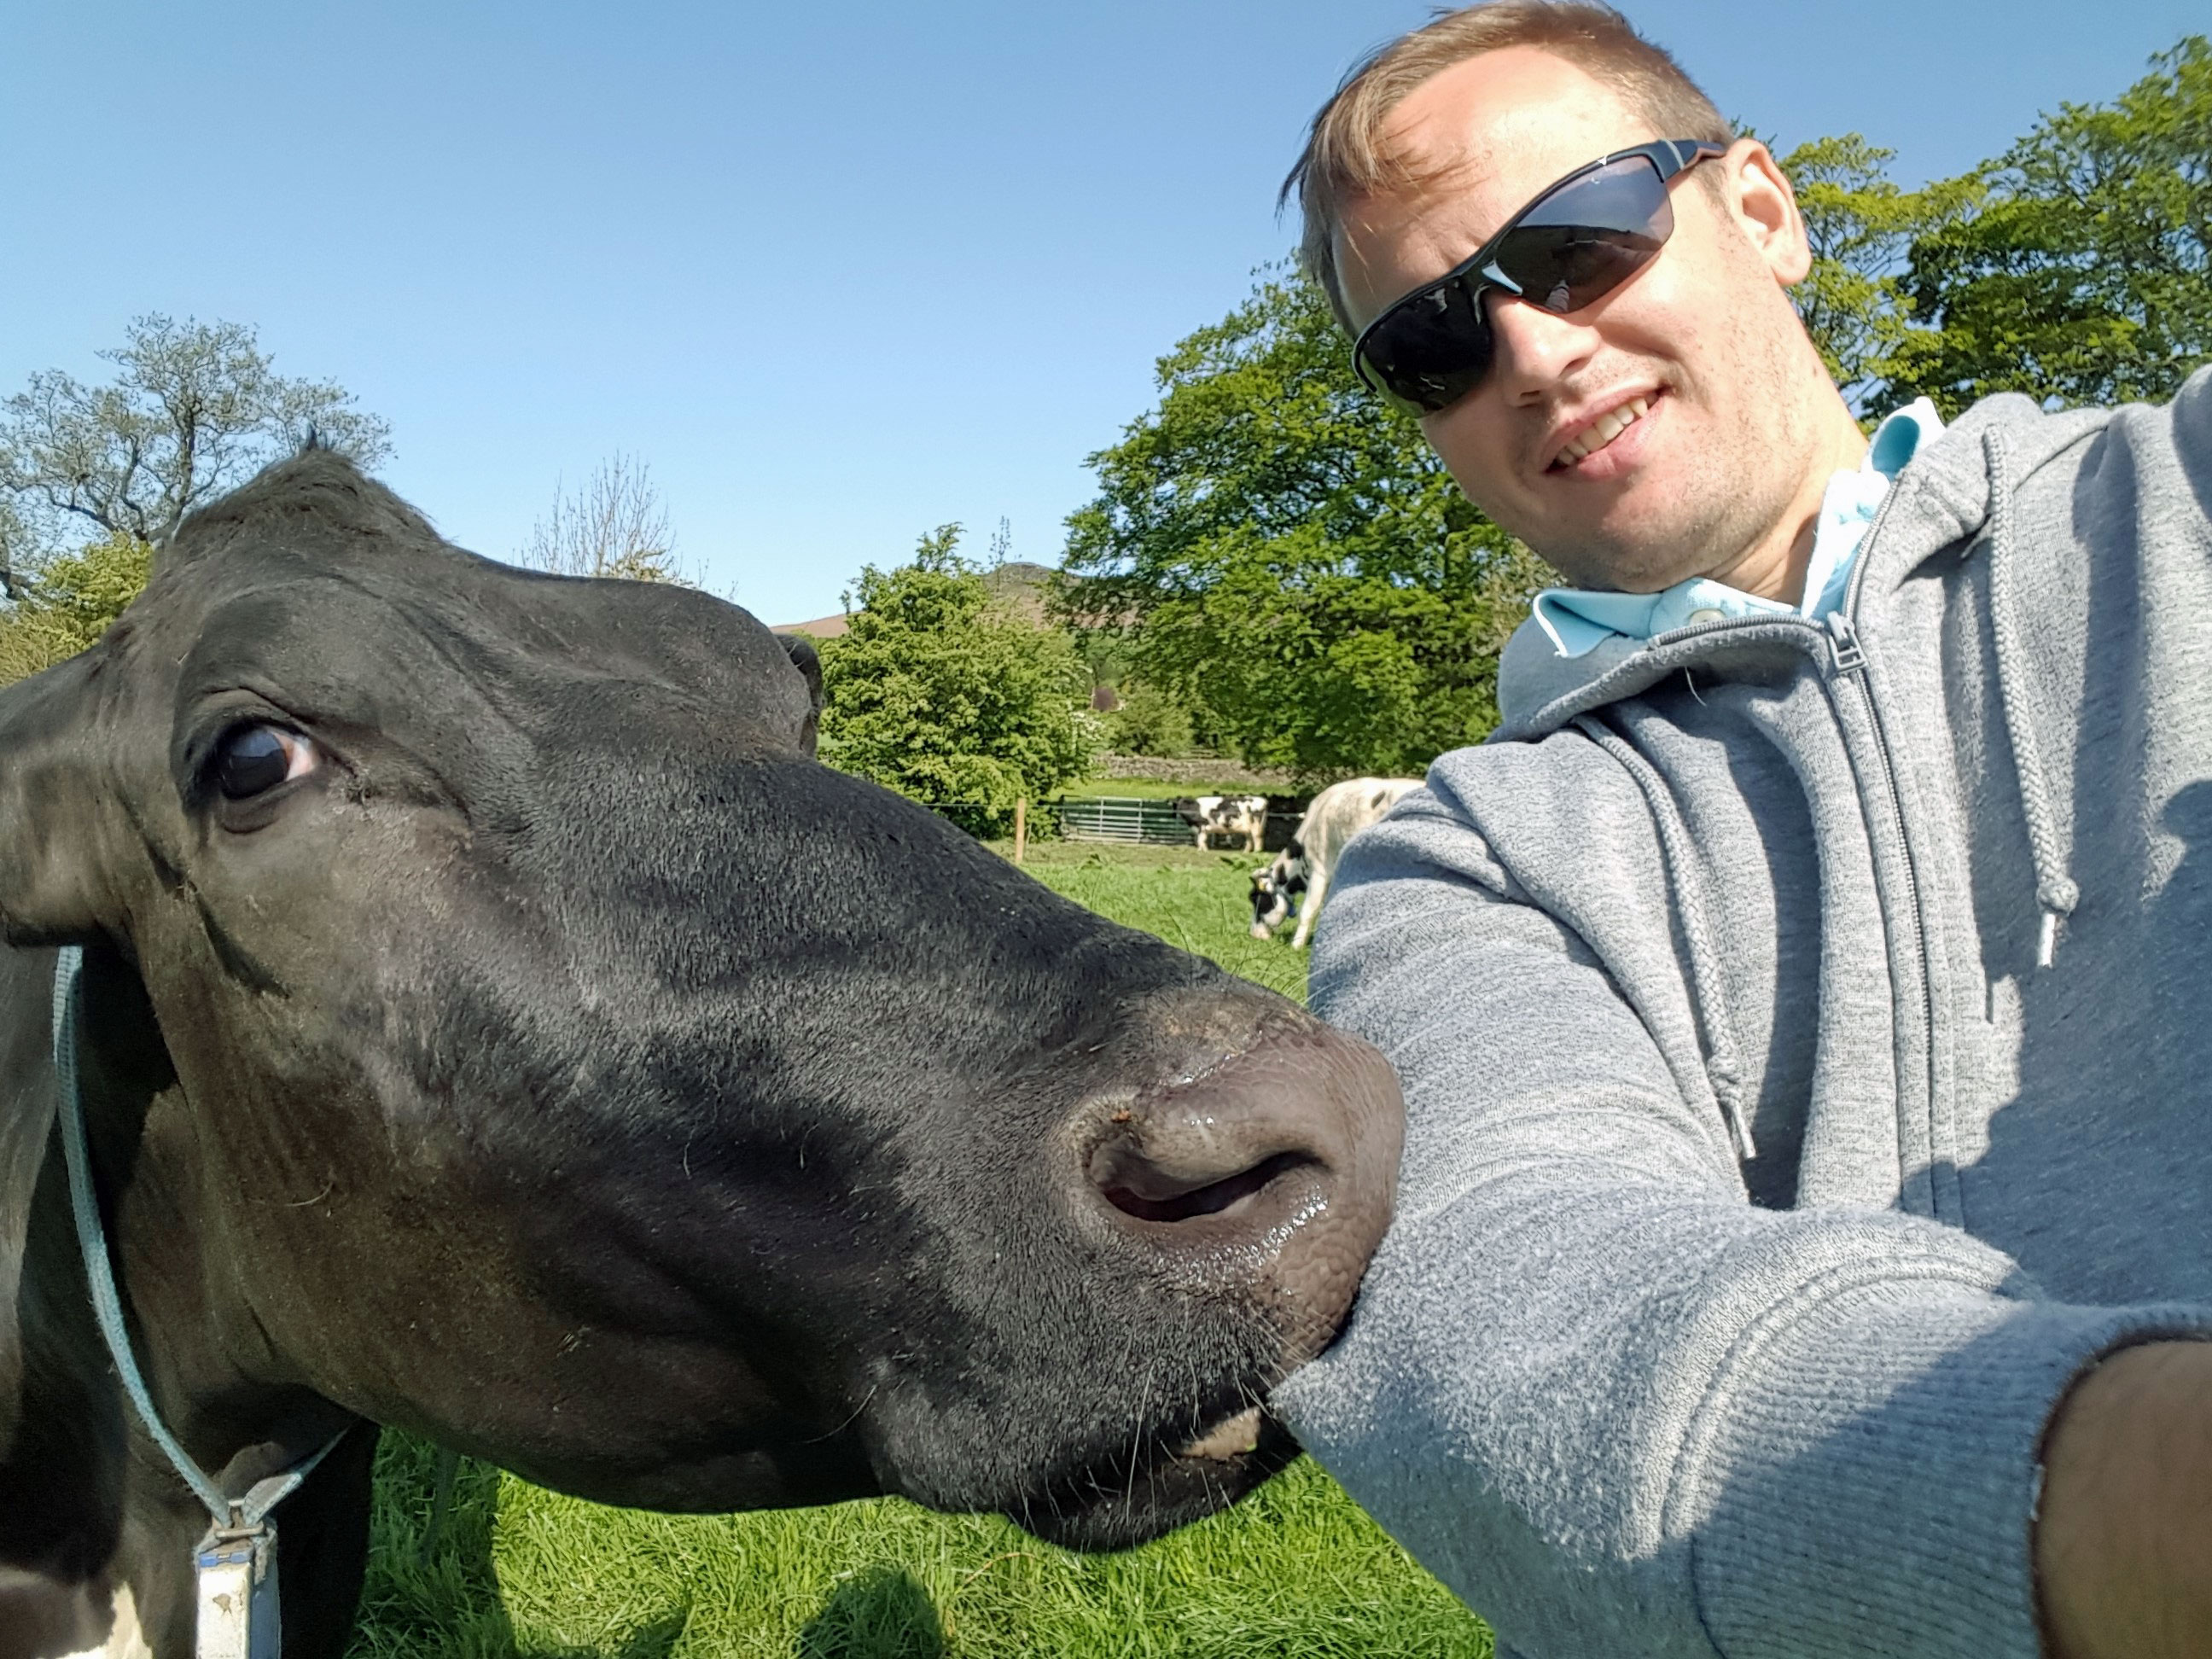 Gary captures a selfie with his new bovine friend